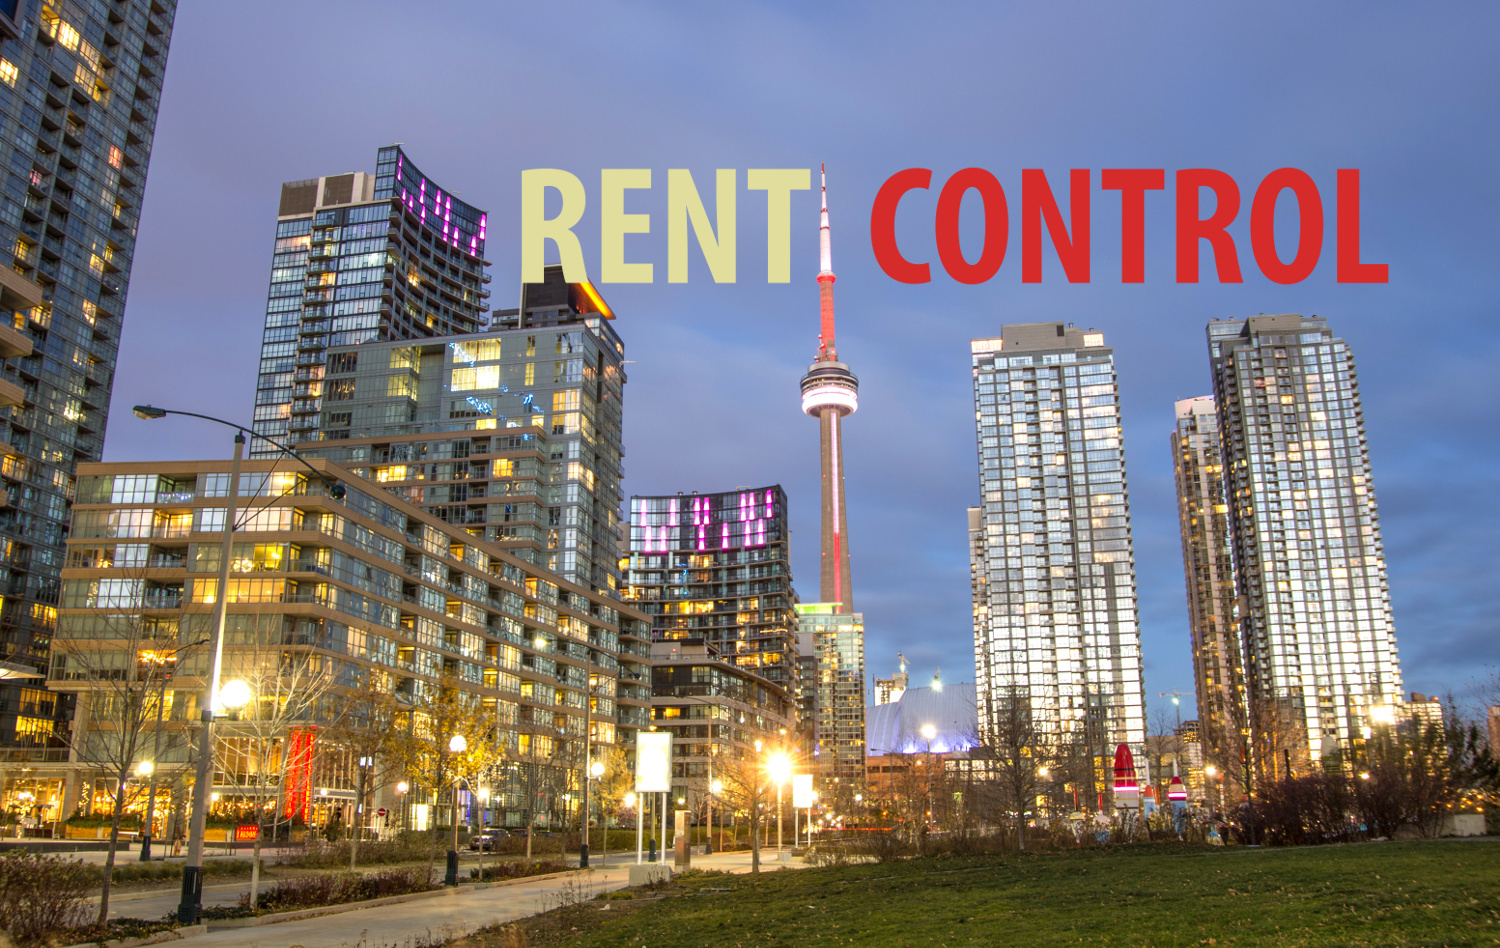 Ontario Bill Proposes Rent Control For All Tenants in the Province